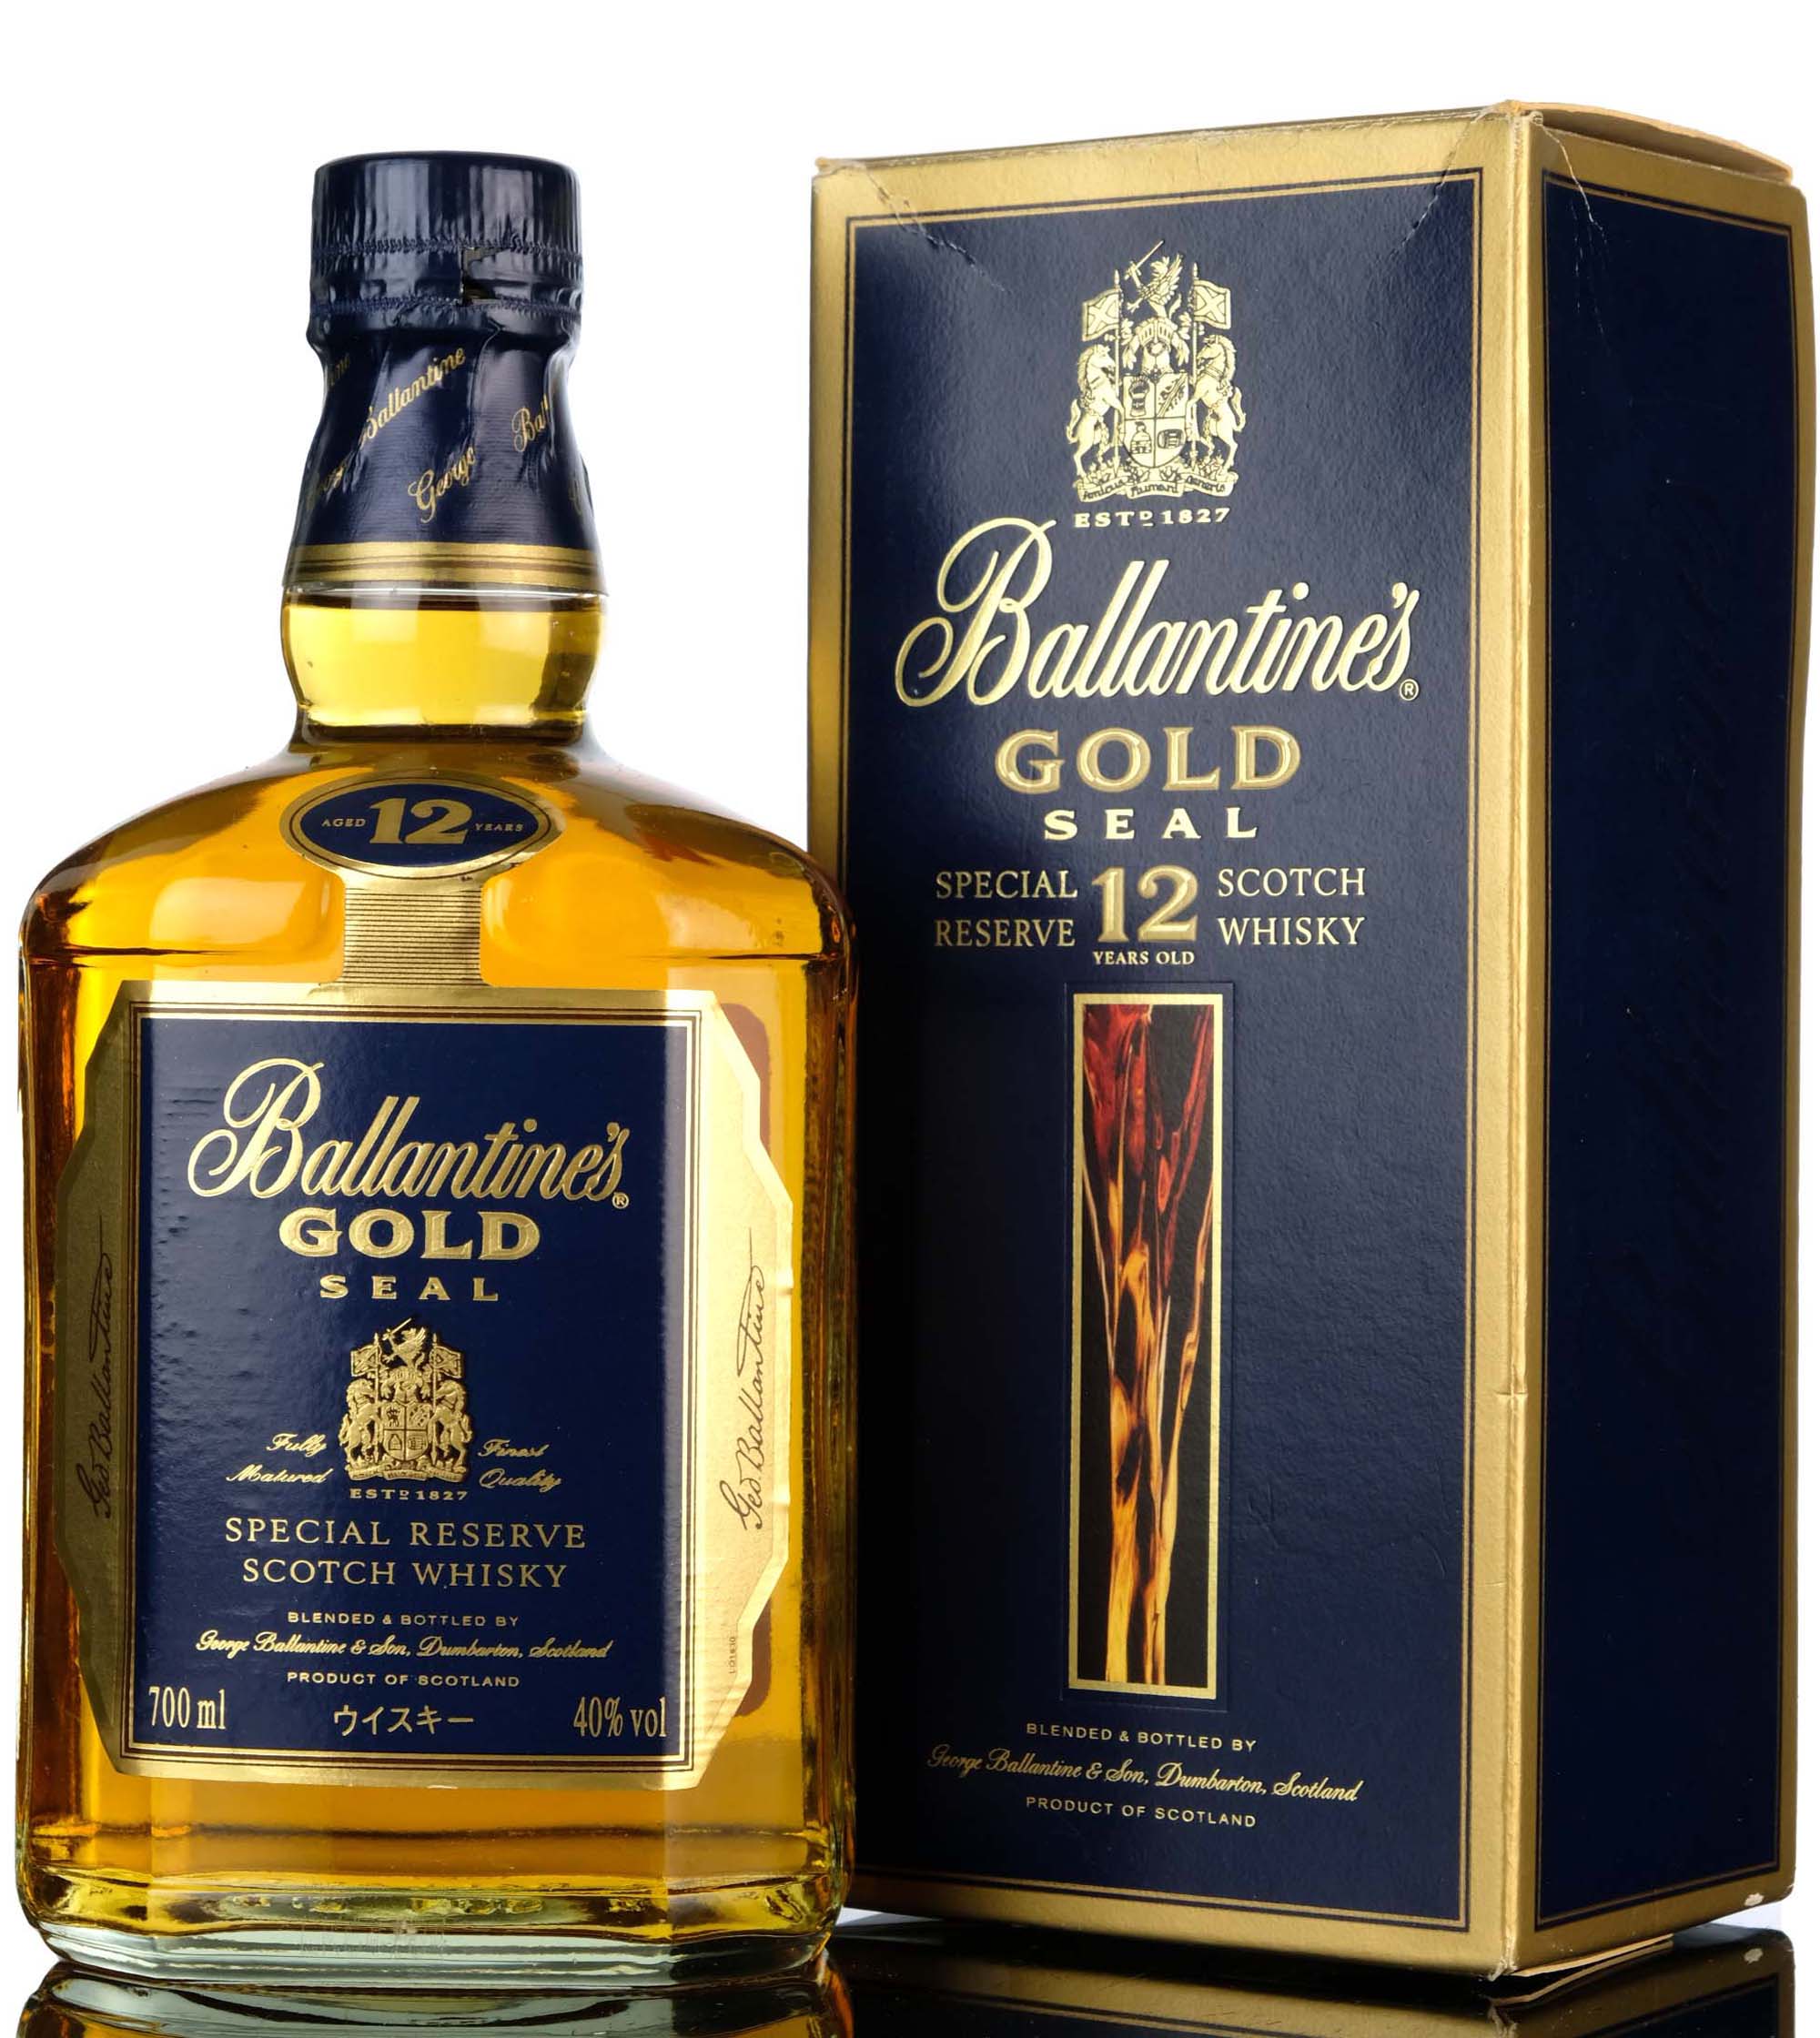 Ballantines 12 Year Old - Gold Seal Special Reserve - 1990s